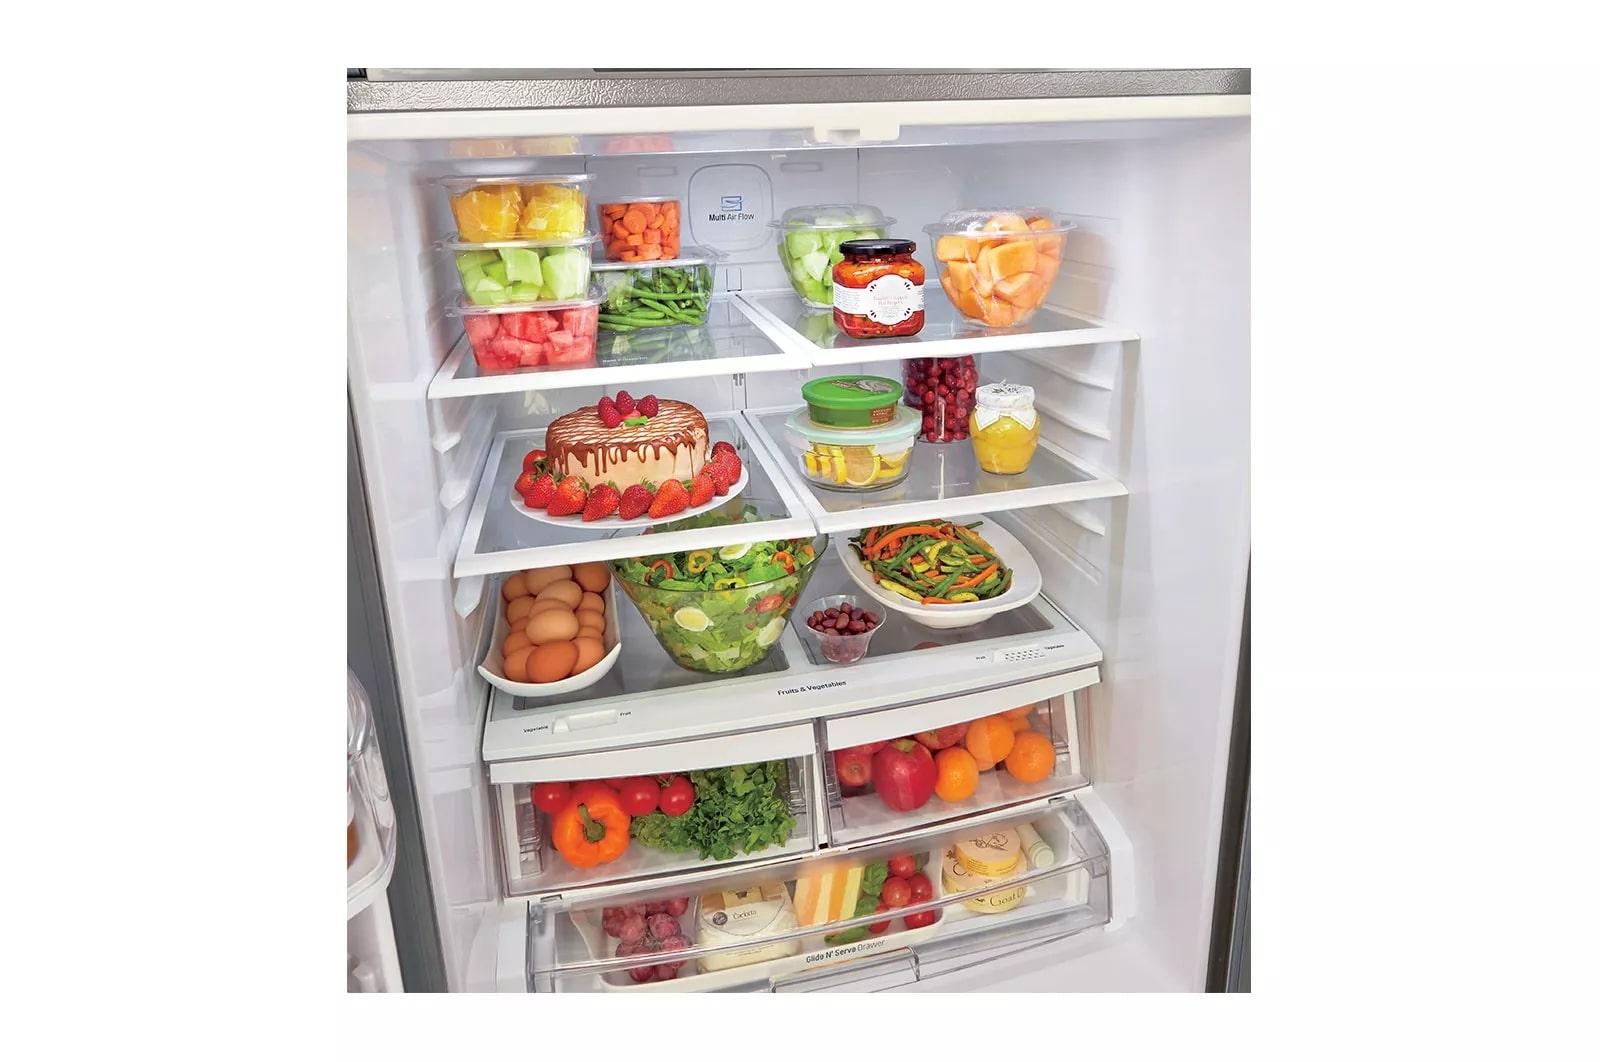 LG LFDS22520S 22 Cu. Ft. Stainless French Door Refrigerator - image 5 of 5